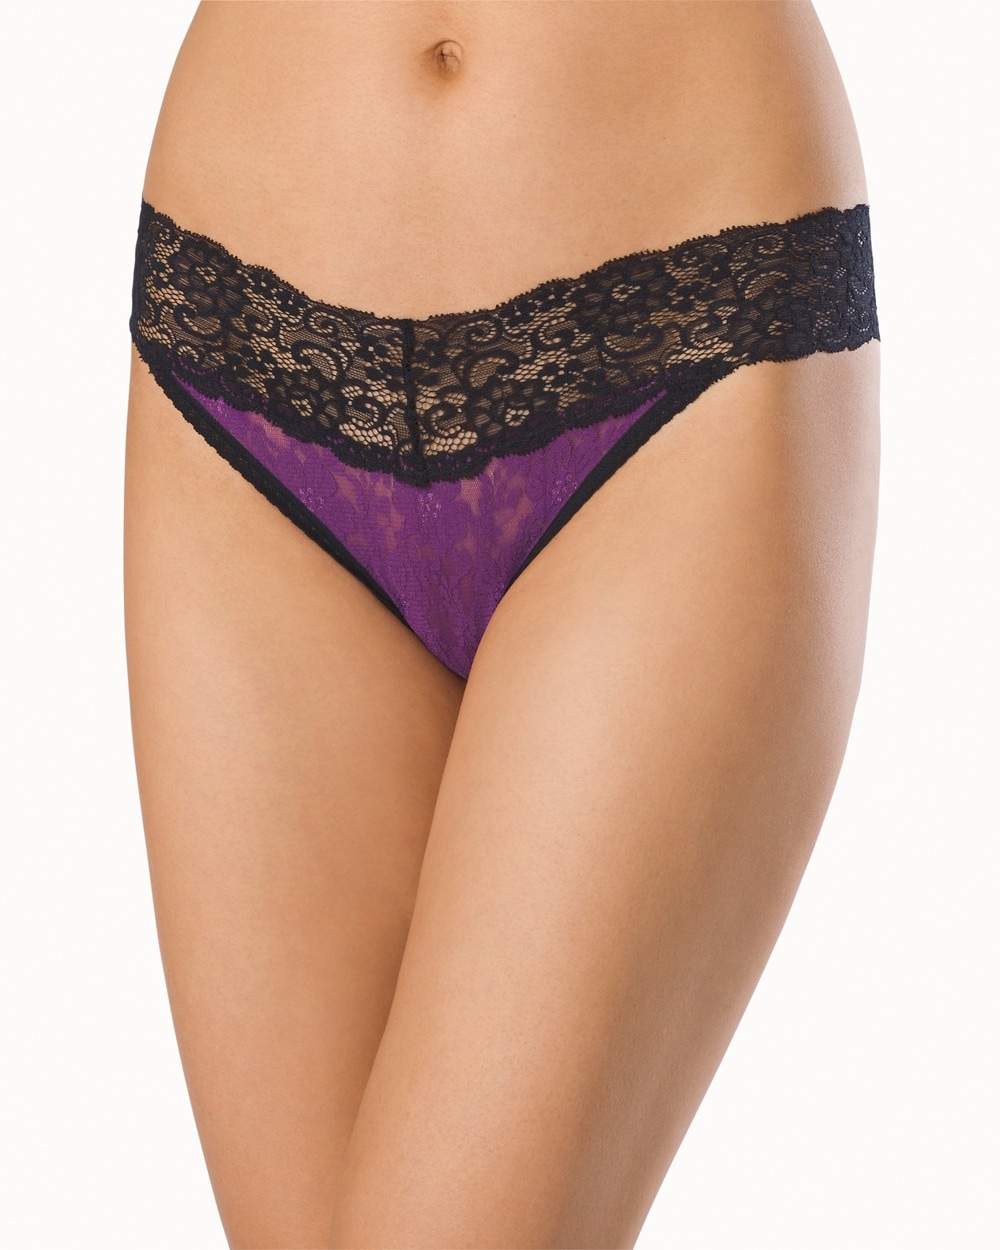 Embraceable Allover Lace Thong